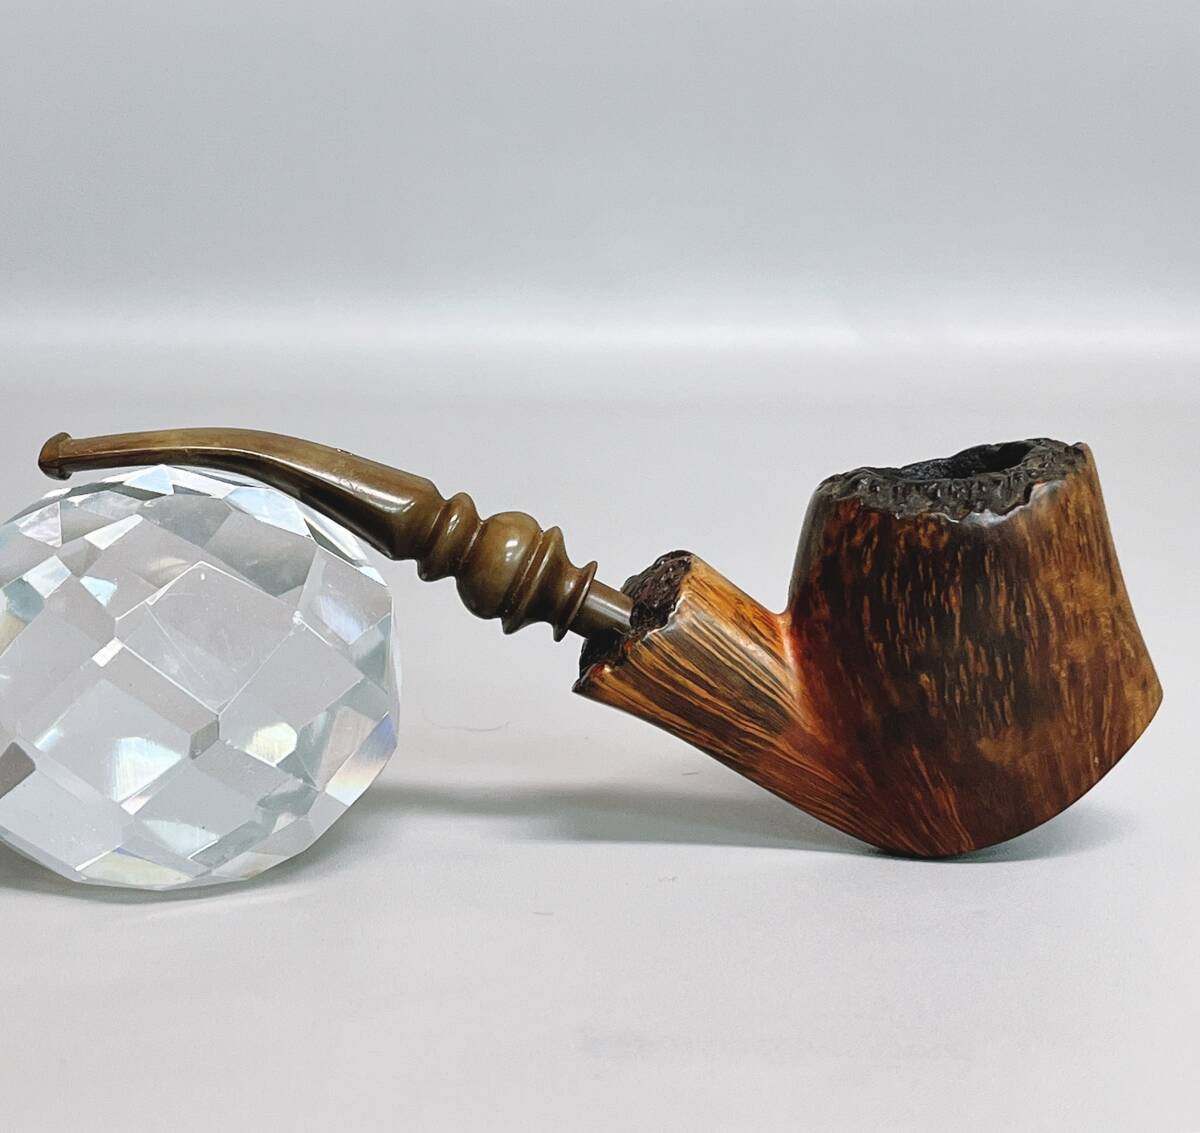 1：STANWELL NO:969-48 FLame Grain MADE IN DENMARK スタンウェル 天然木 パイプ 喫煙具 デンマーク製 _画像3